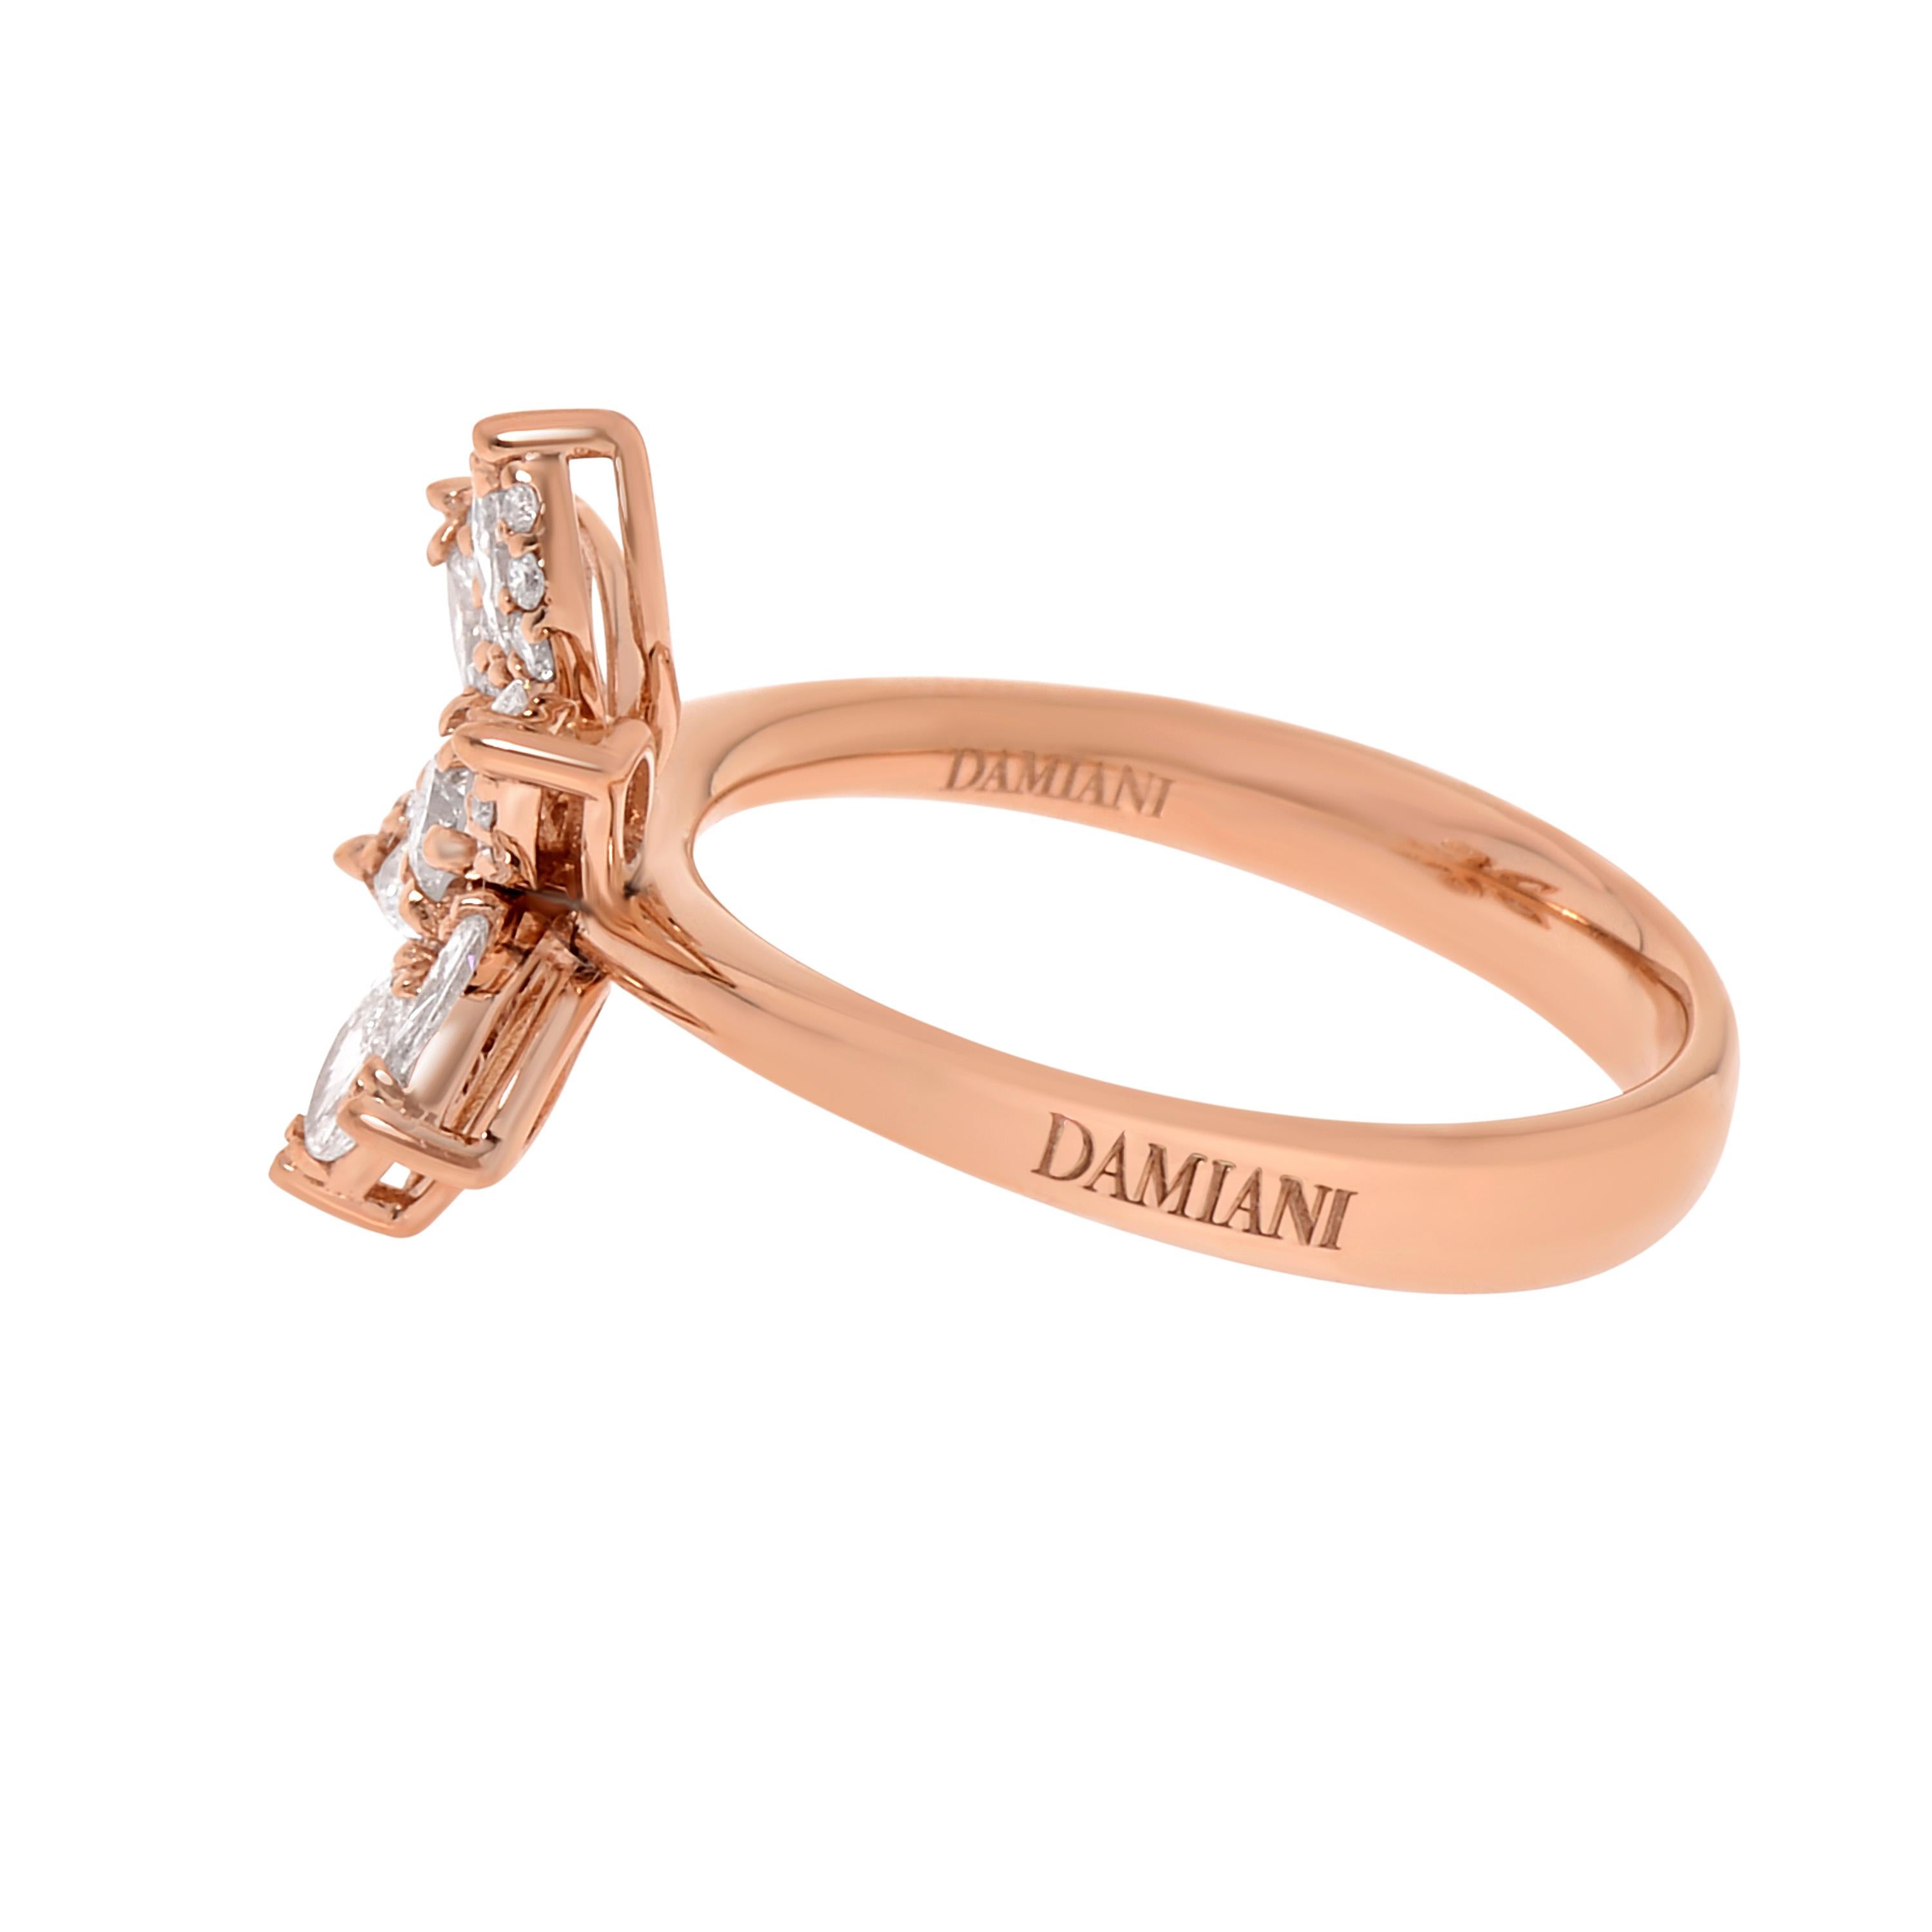 Contemporary Damiani 18K Rose Gold, Diamond Statement Ring sz. 6.5 For Sale